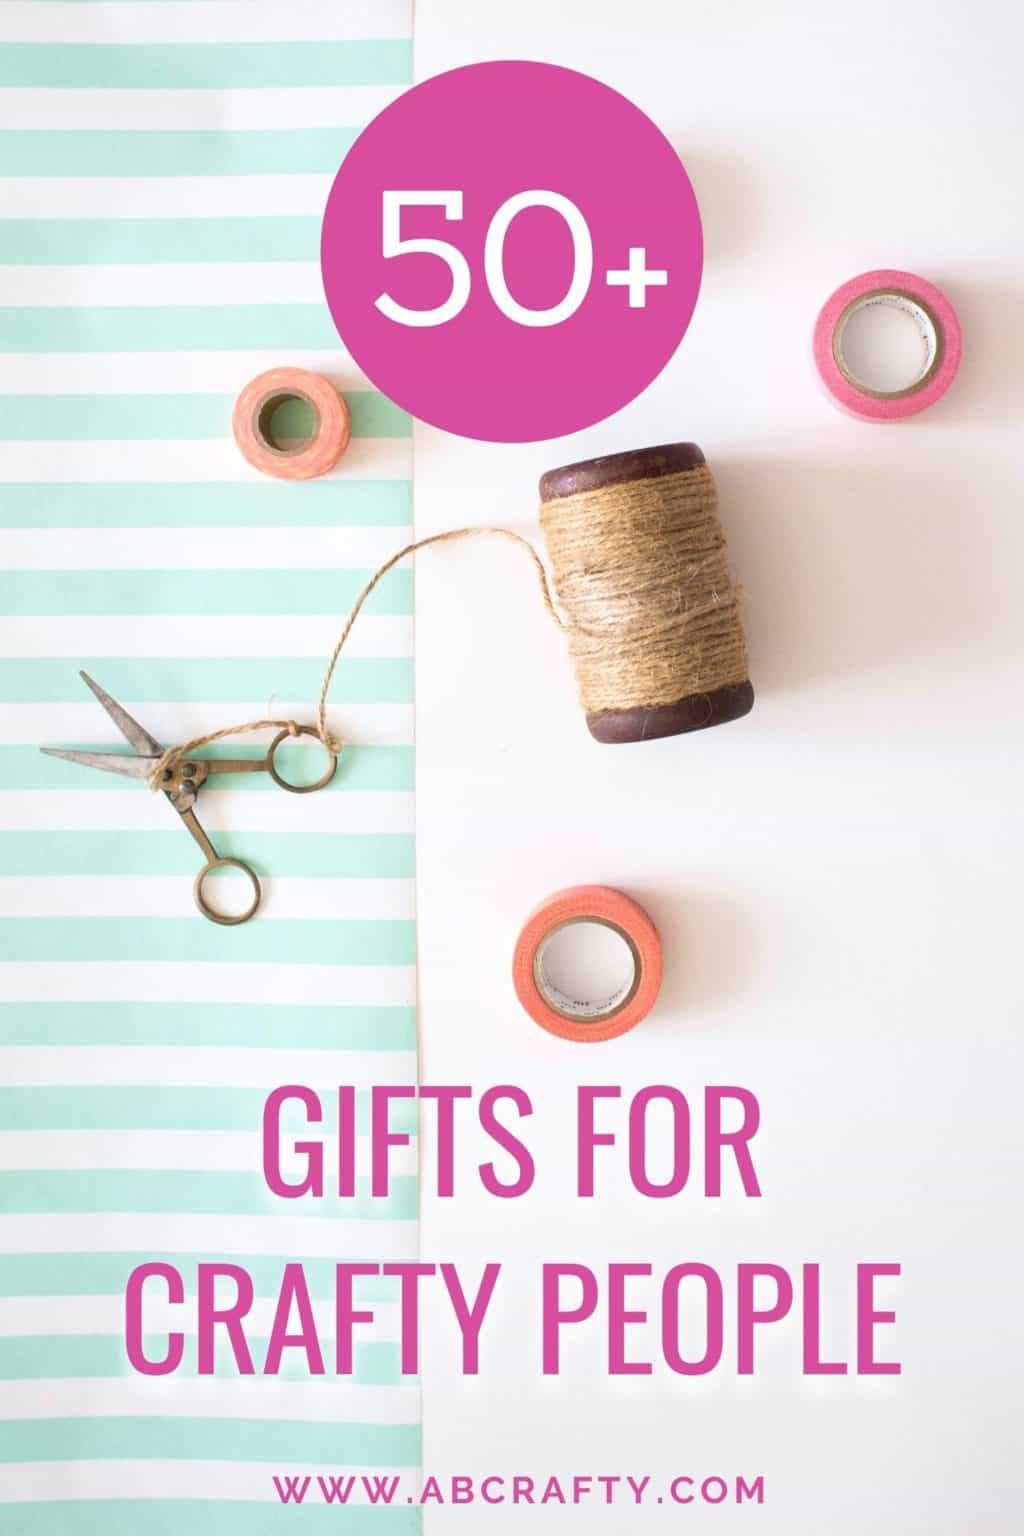 20 best gifts for craft lovers: Craft gits from Cricut, Michael's